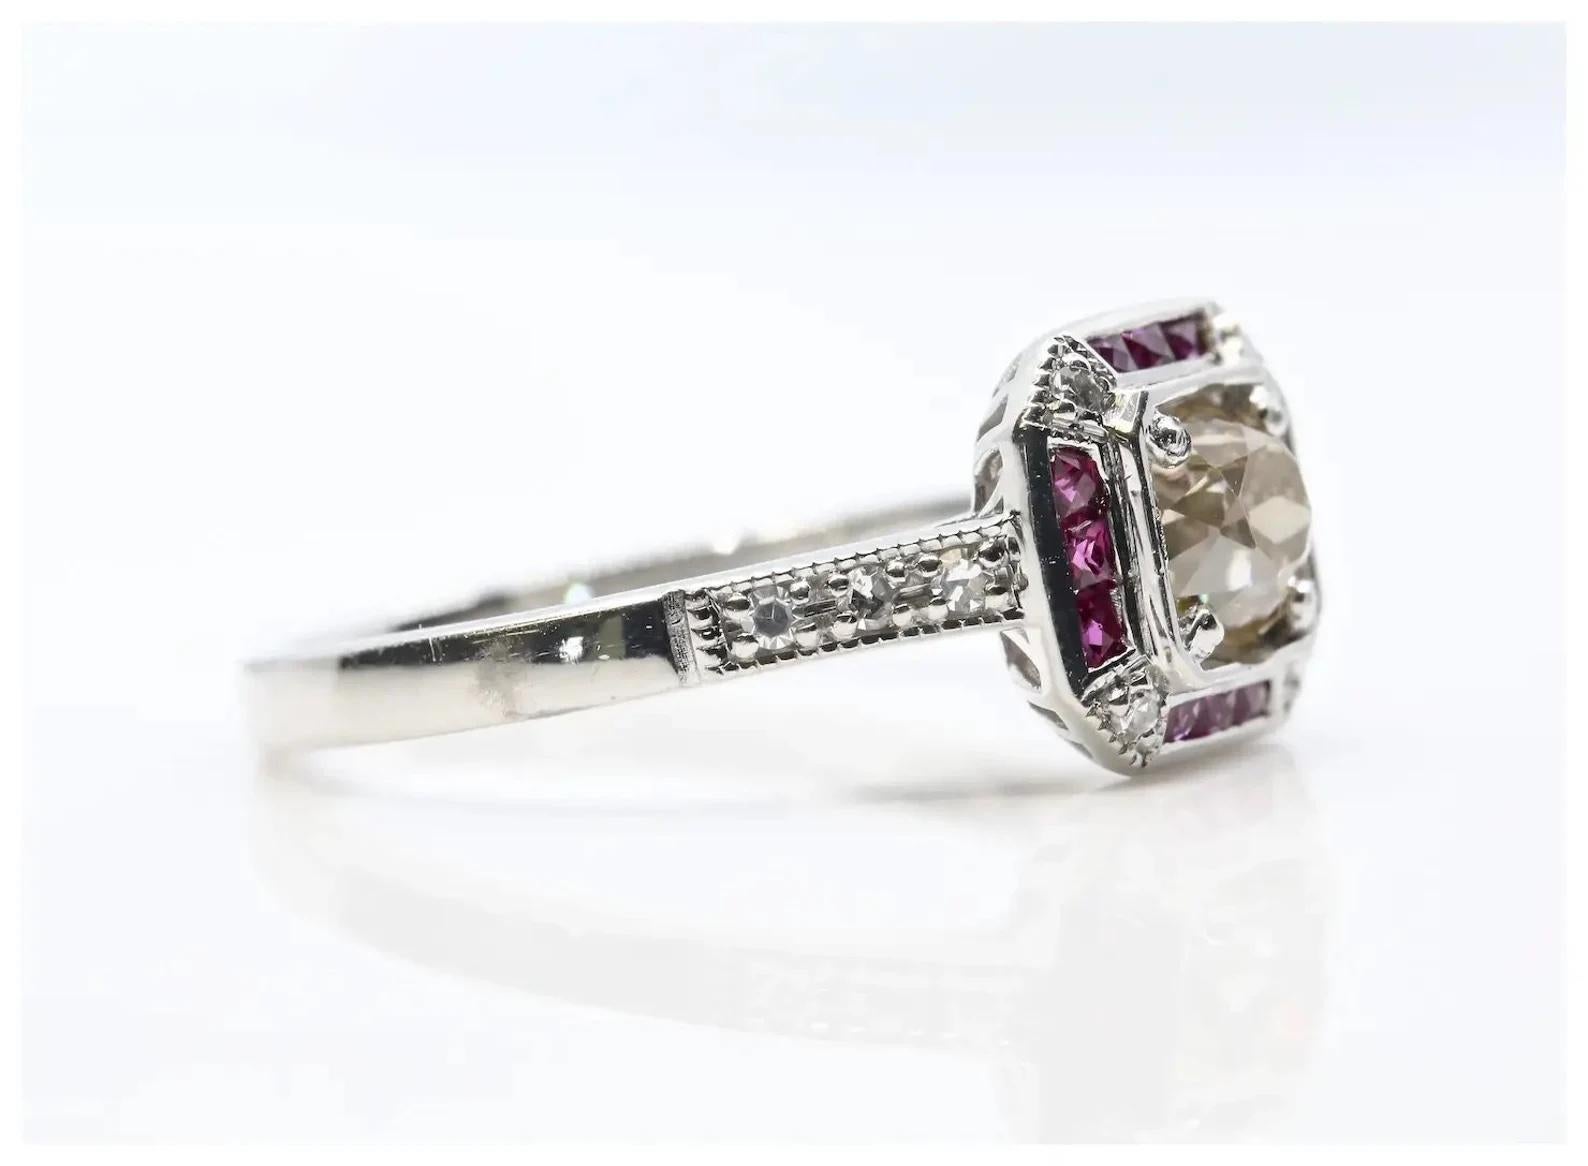 A beautiful Art Deco style champagne diamond, and ruby engagement ring in platinum.

Centered by a 0.50 carat old mine cut diamond of rich champagne color and VS2 clarity.

The diamond framed by a dozen French cut rubies of 0.48ctw, and ten pave set